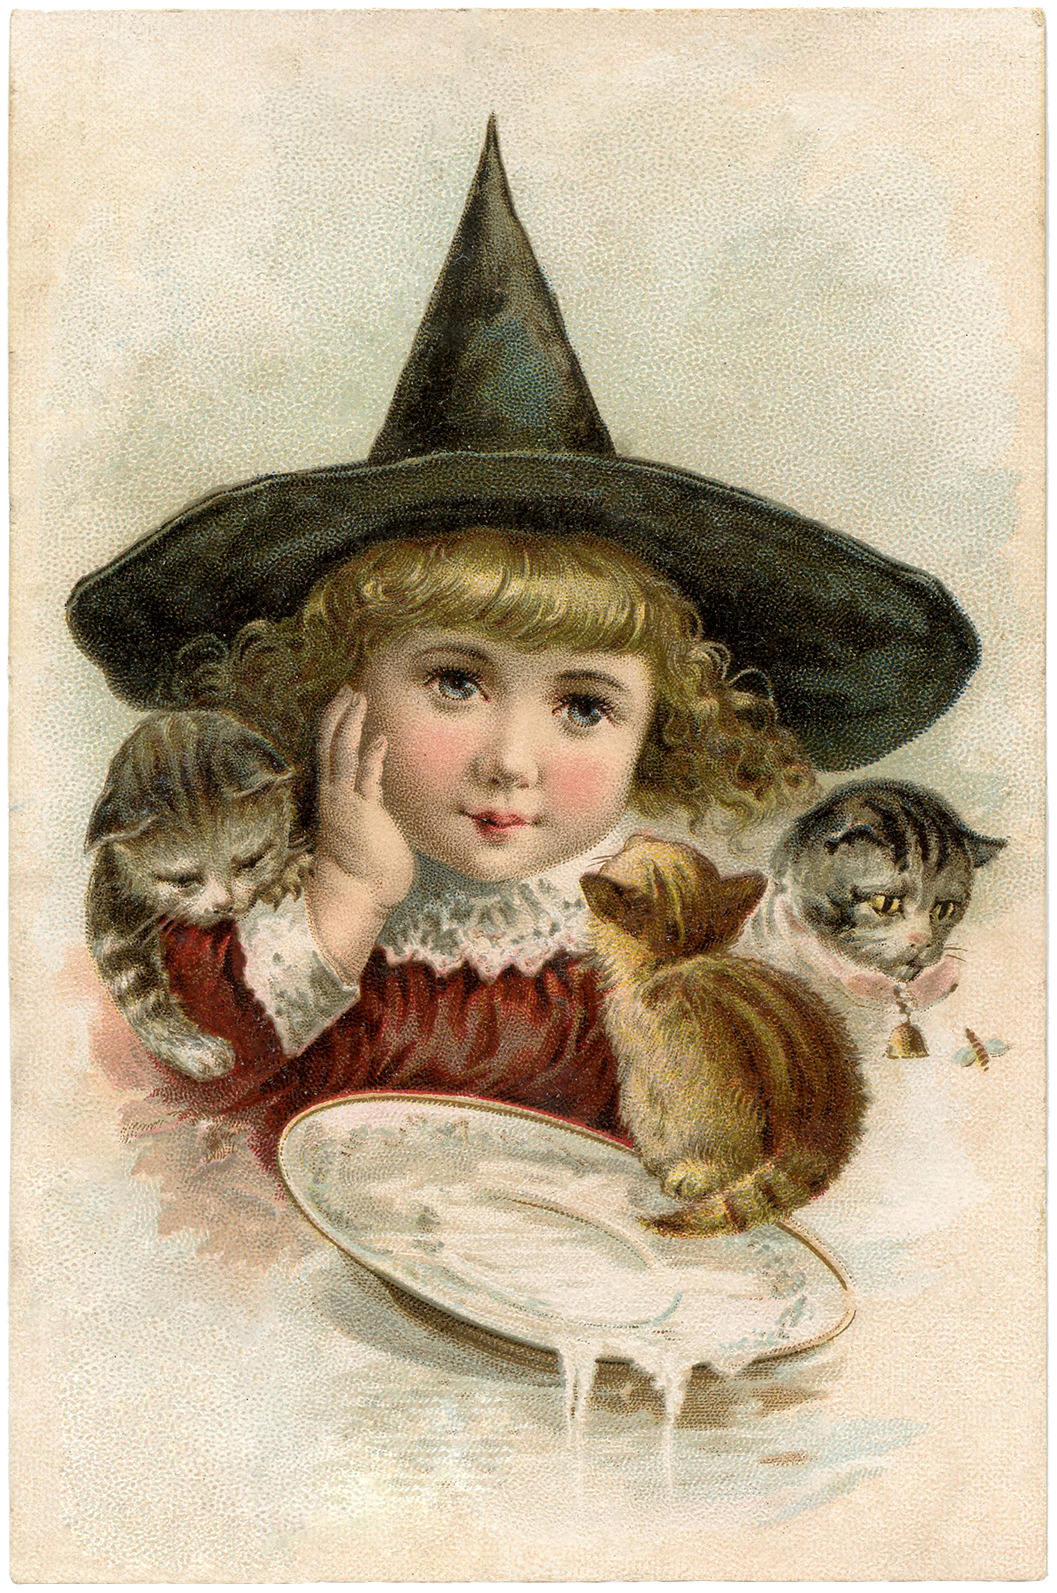 Vintage Halloween Clip Art - Precious Little Witch - The ...